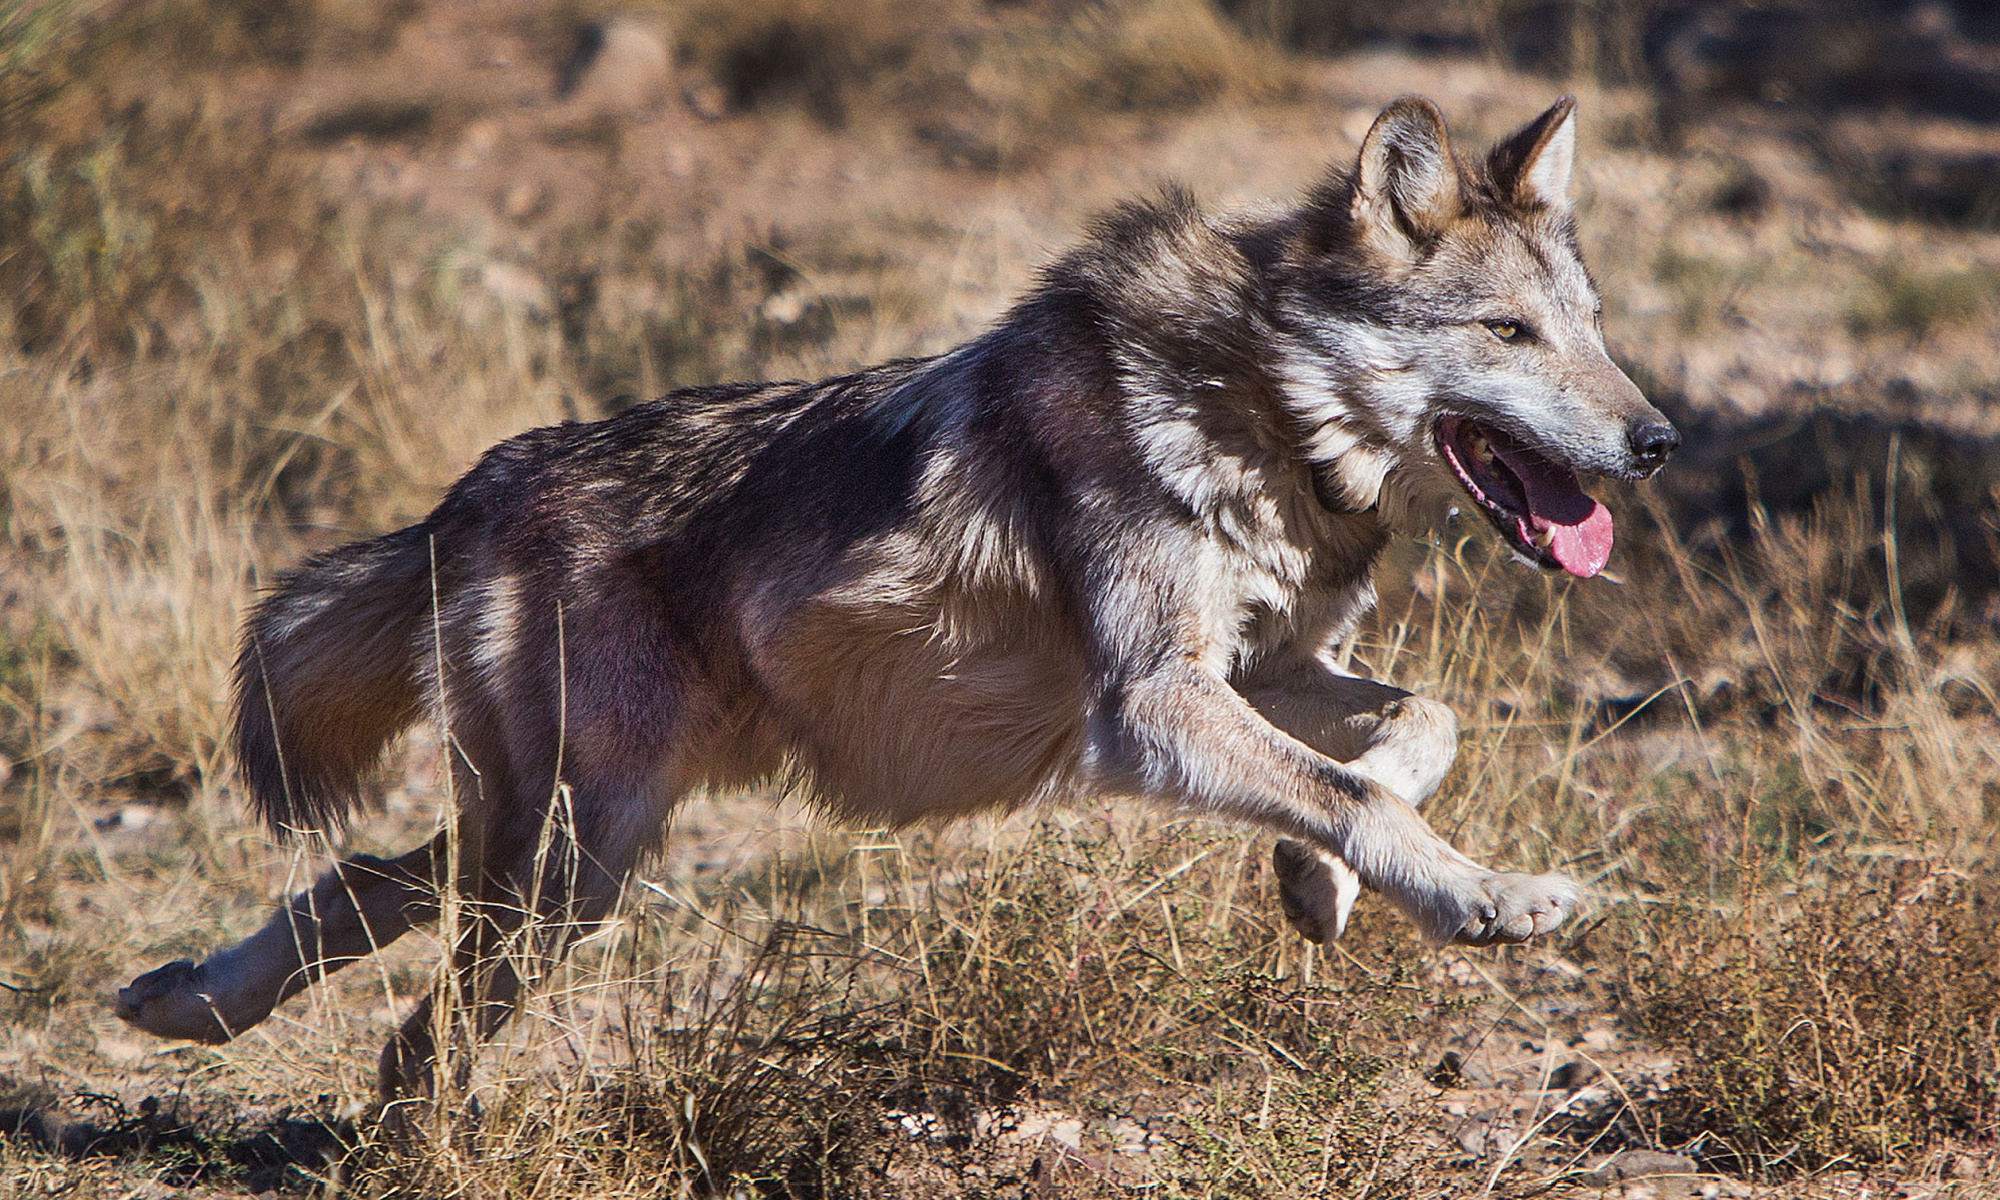 Mexican wolf captured outside recovery zone